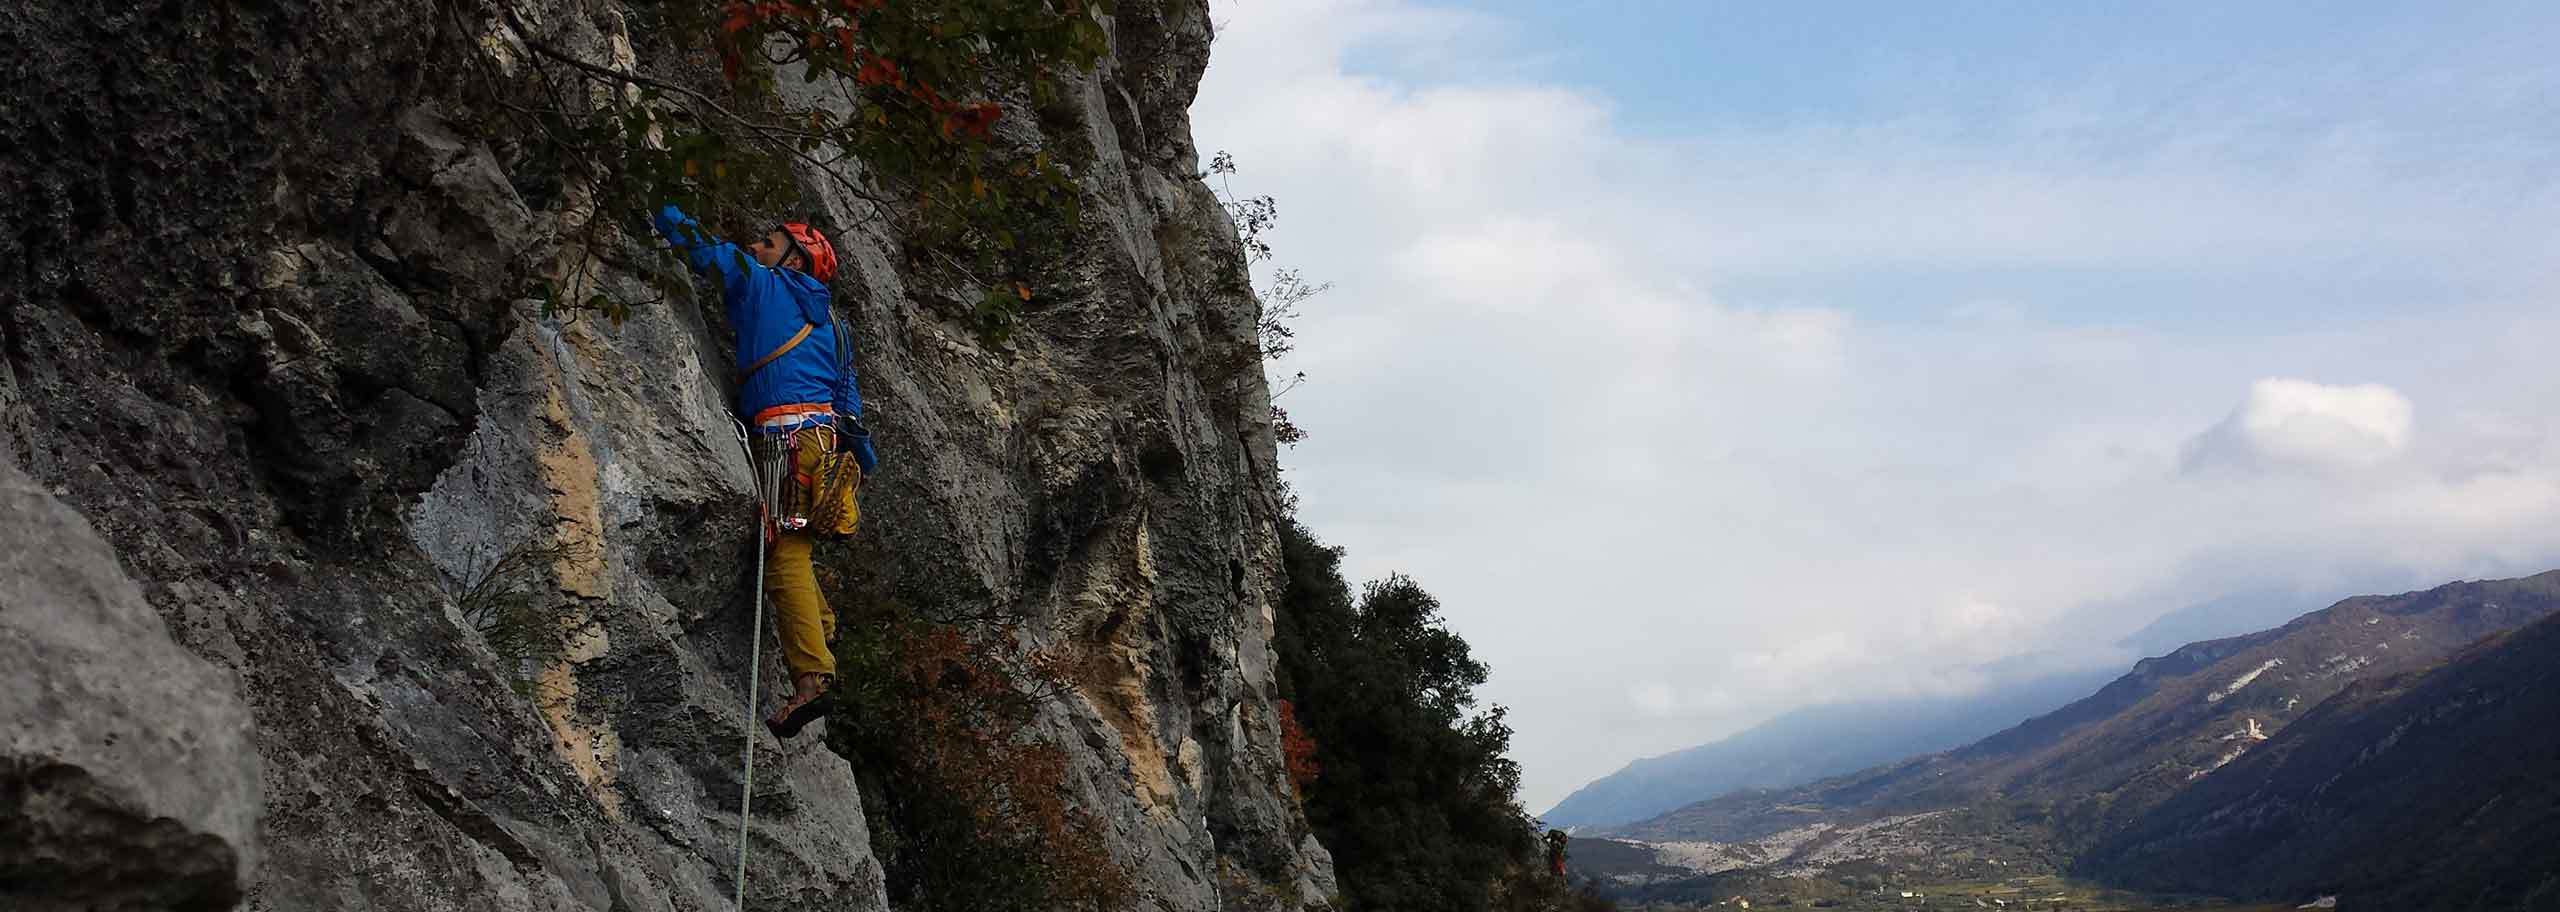 Rock Climbing in Arco with a Mountain Guide